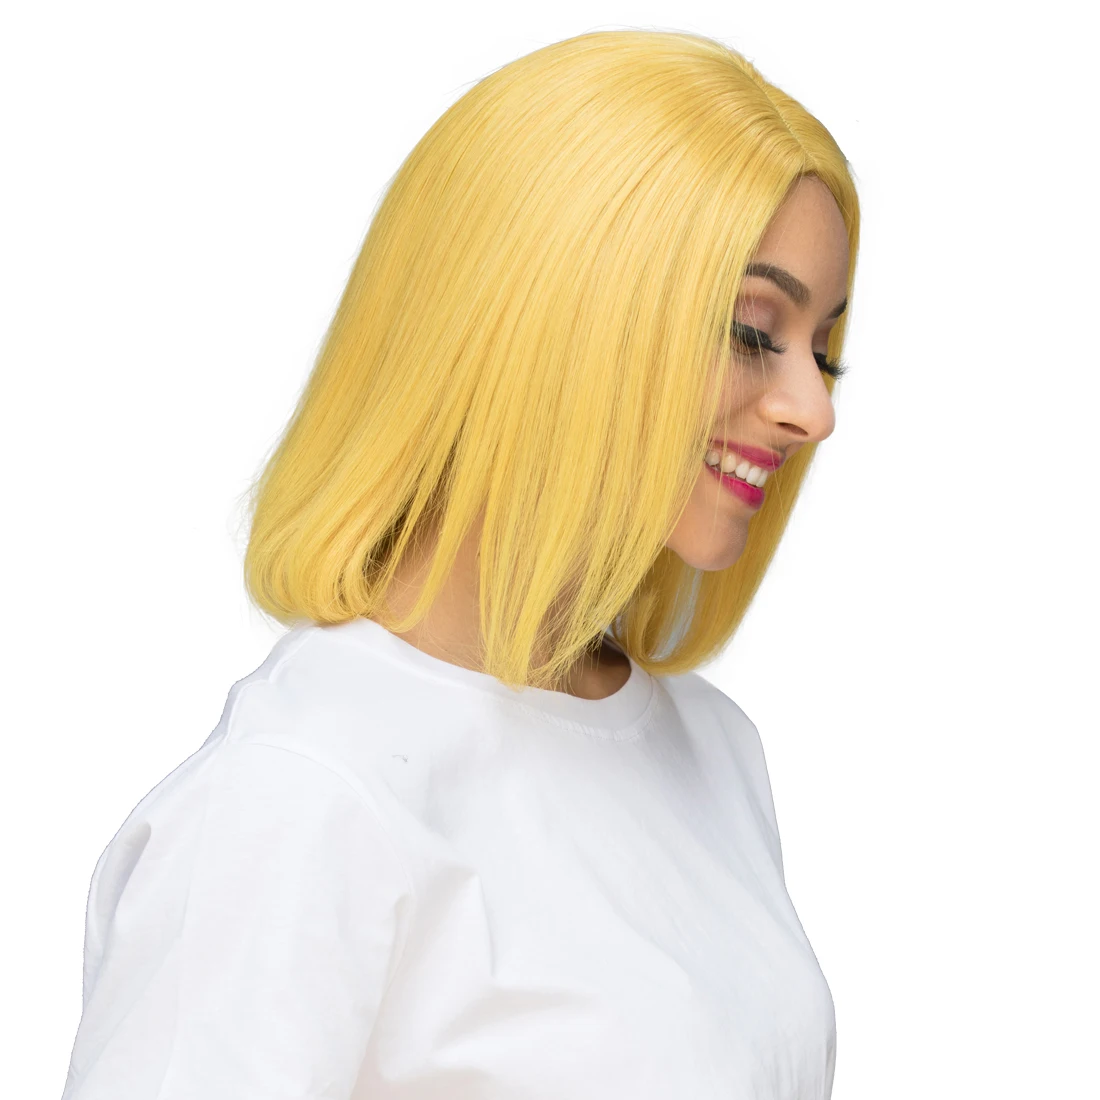 Lsy Hair Ginger Royal Yellow Color Human Hair Bob Wigs, Glueless Straight Short Lace Front Virgin Human Hair Wigs For Sale.jpg